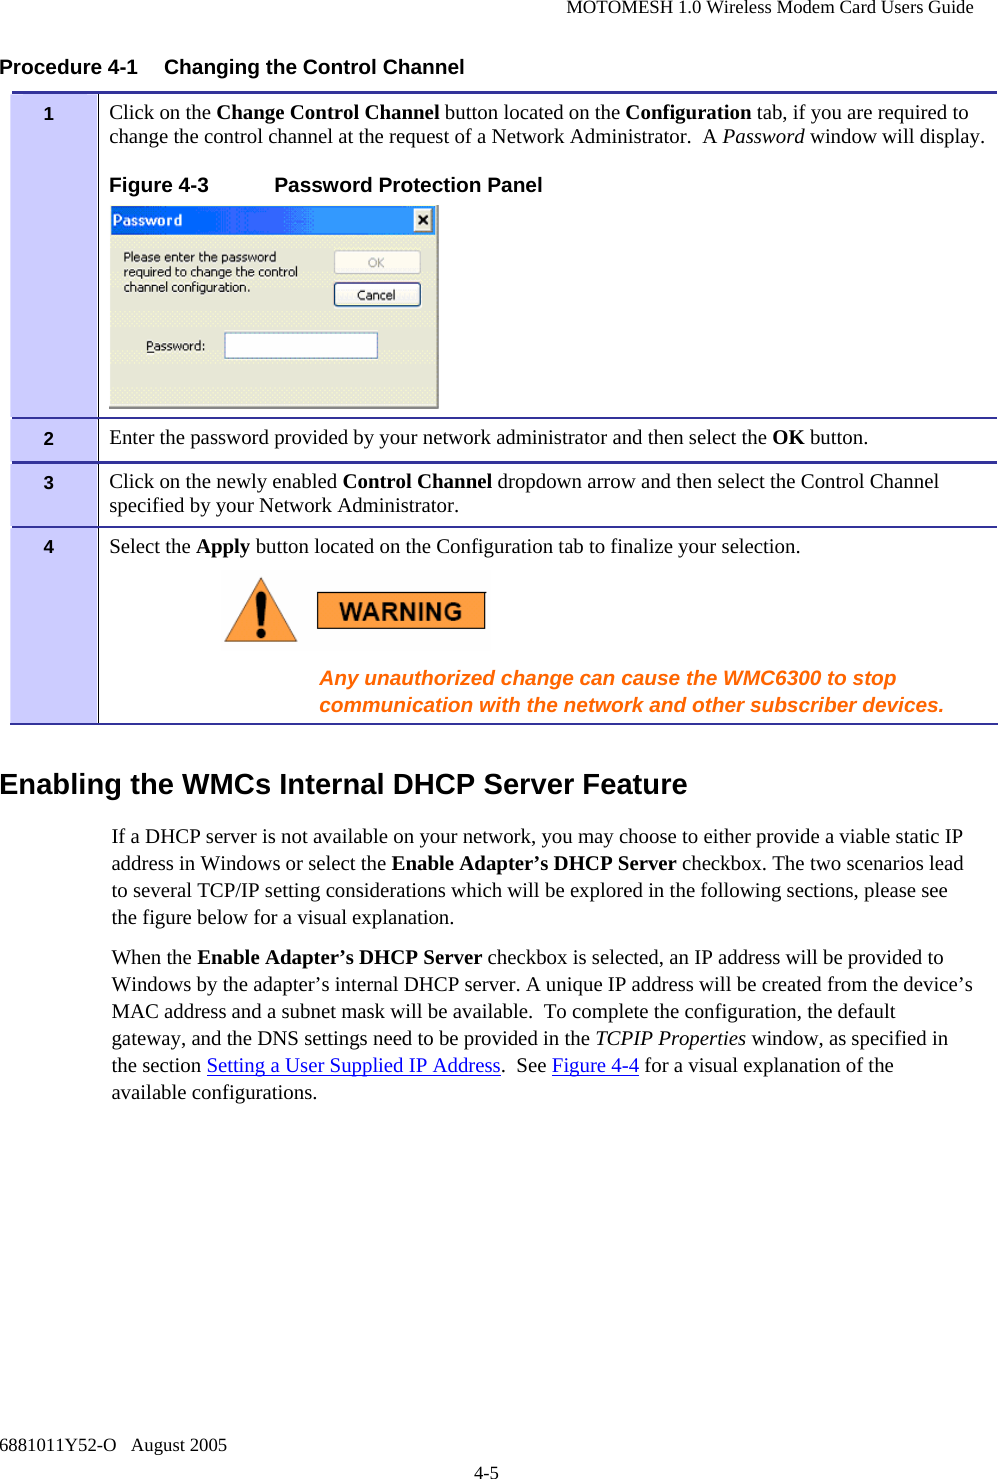 MOTOMESH 1.0 Wireless Modem Card Users Guide 6881011Y52-O   August 2005 4-5 Procedure 4-1  Changing the Control Channel Enabling the WMCs Internal DHCP Server Feature If a DHCP server is not available on your network, you may choose to either provide a viable static IP address in Windows or select the Enable Adapter’s DHCP Server checkbox. The two scenarios lead to several TCP/IP setting considerations which will be explored in the following sections, please see the figure below for a visual explanation. When the Enable Adapter’s DHCP Server checkbox is selected, an IP address will be provided to Windows by the adapter’s internal DHCP server. A unique IP address will be created from the device’s MAC address and a subnet mask will be available.  To complete the configuration, the default gateway, and the DNS settings need to be provided in the TCPIP Properties window, as specified in the section Setting a User Supplied IP Address.  See Figure 4-4 for a visual explanation of the available configurations. 1   Click on the Change Control Channel button located on the Configuration tab, if you are required to change the control channel at the request of a Network Administrator.  A Password window will display. Figure 4-3  Password Protection Panel  2   Enter the password provided by your network administrator and then select the OK button. 3   Click on the newly enabled Control Channel dropdown arrow and then select the Control Channel specified by your Network Administrator. 4   Select the Apply button located on the Configuration tab to finalize your selection.  Any unauthorized change can cause the WMC6300 to stop communication with the network and other subscriber devices. 